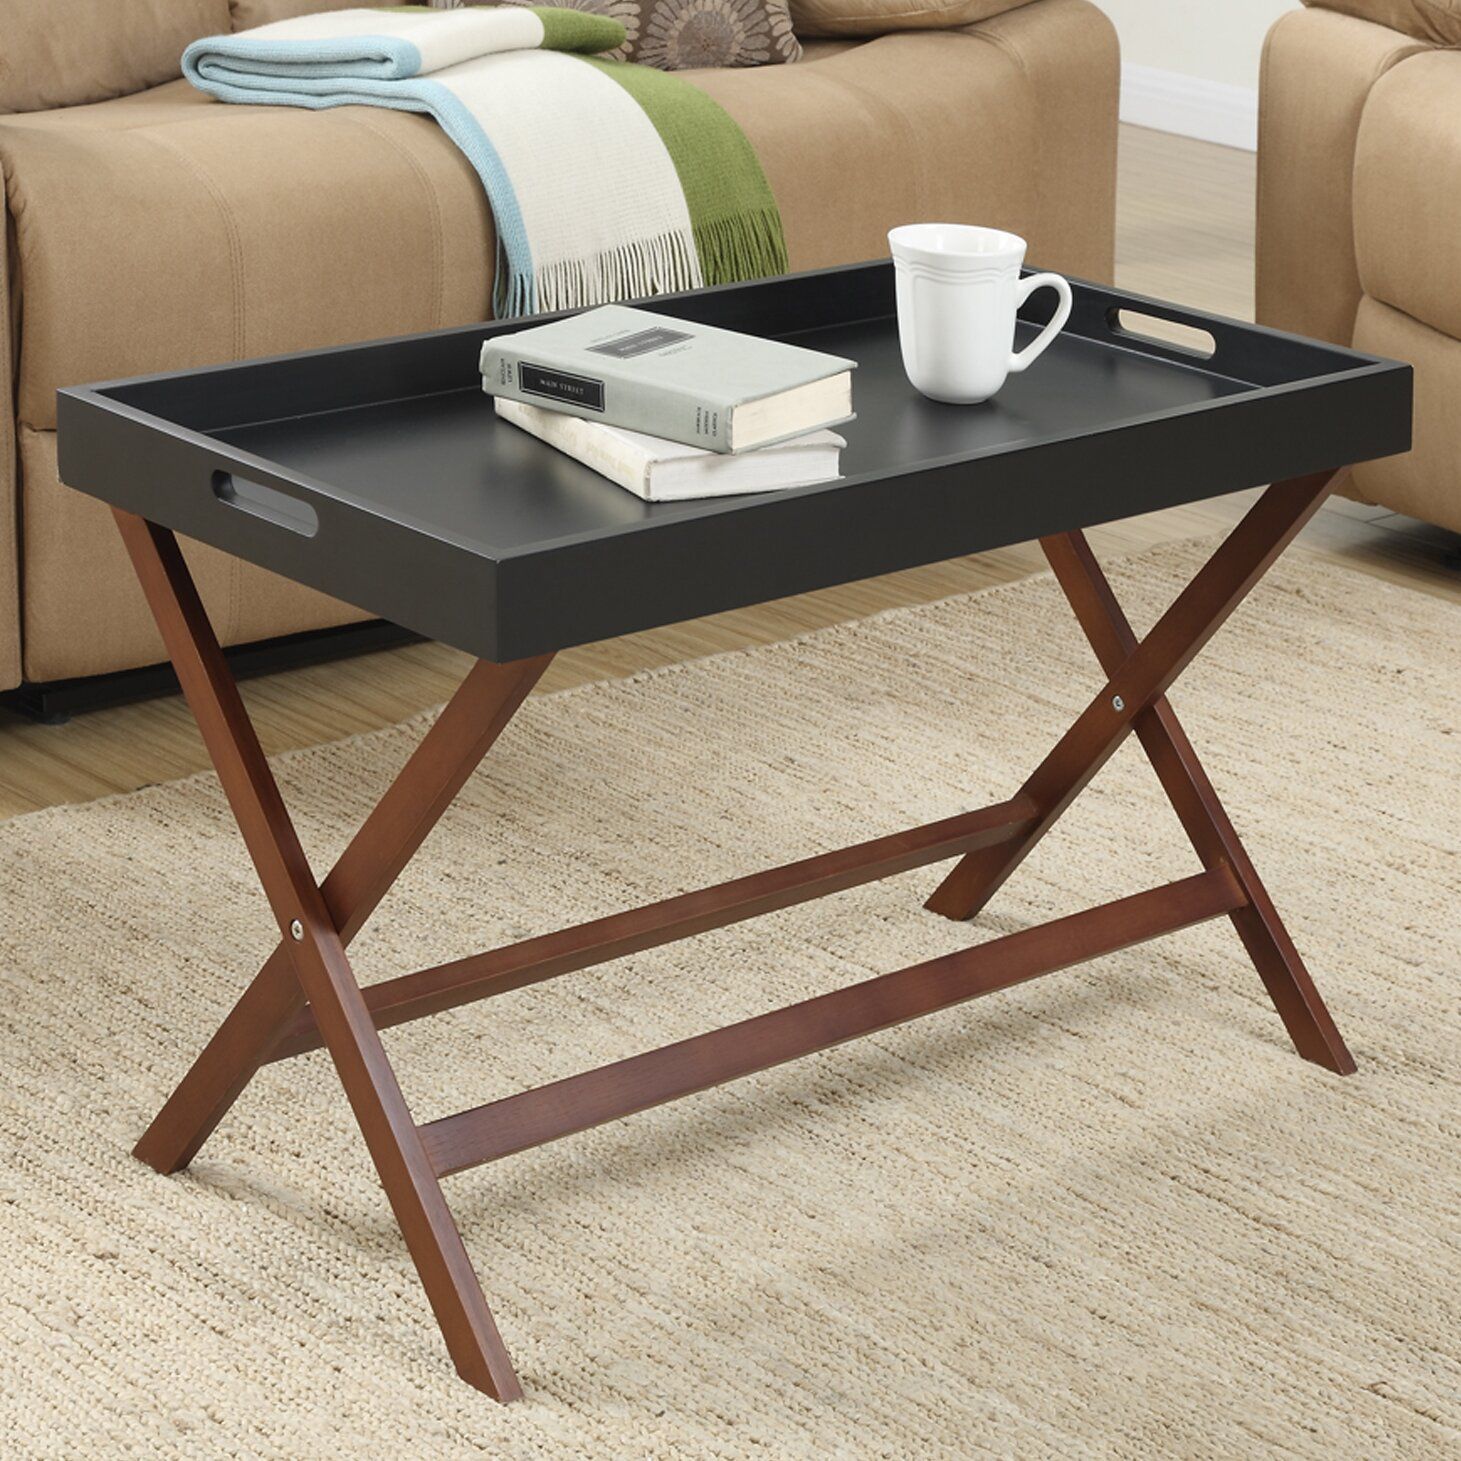 Andover Mills Lockheart Coffee Table With Removable Tray & Reviews Intended For Detachable Tray Coffee Tables (View 2 of 20)